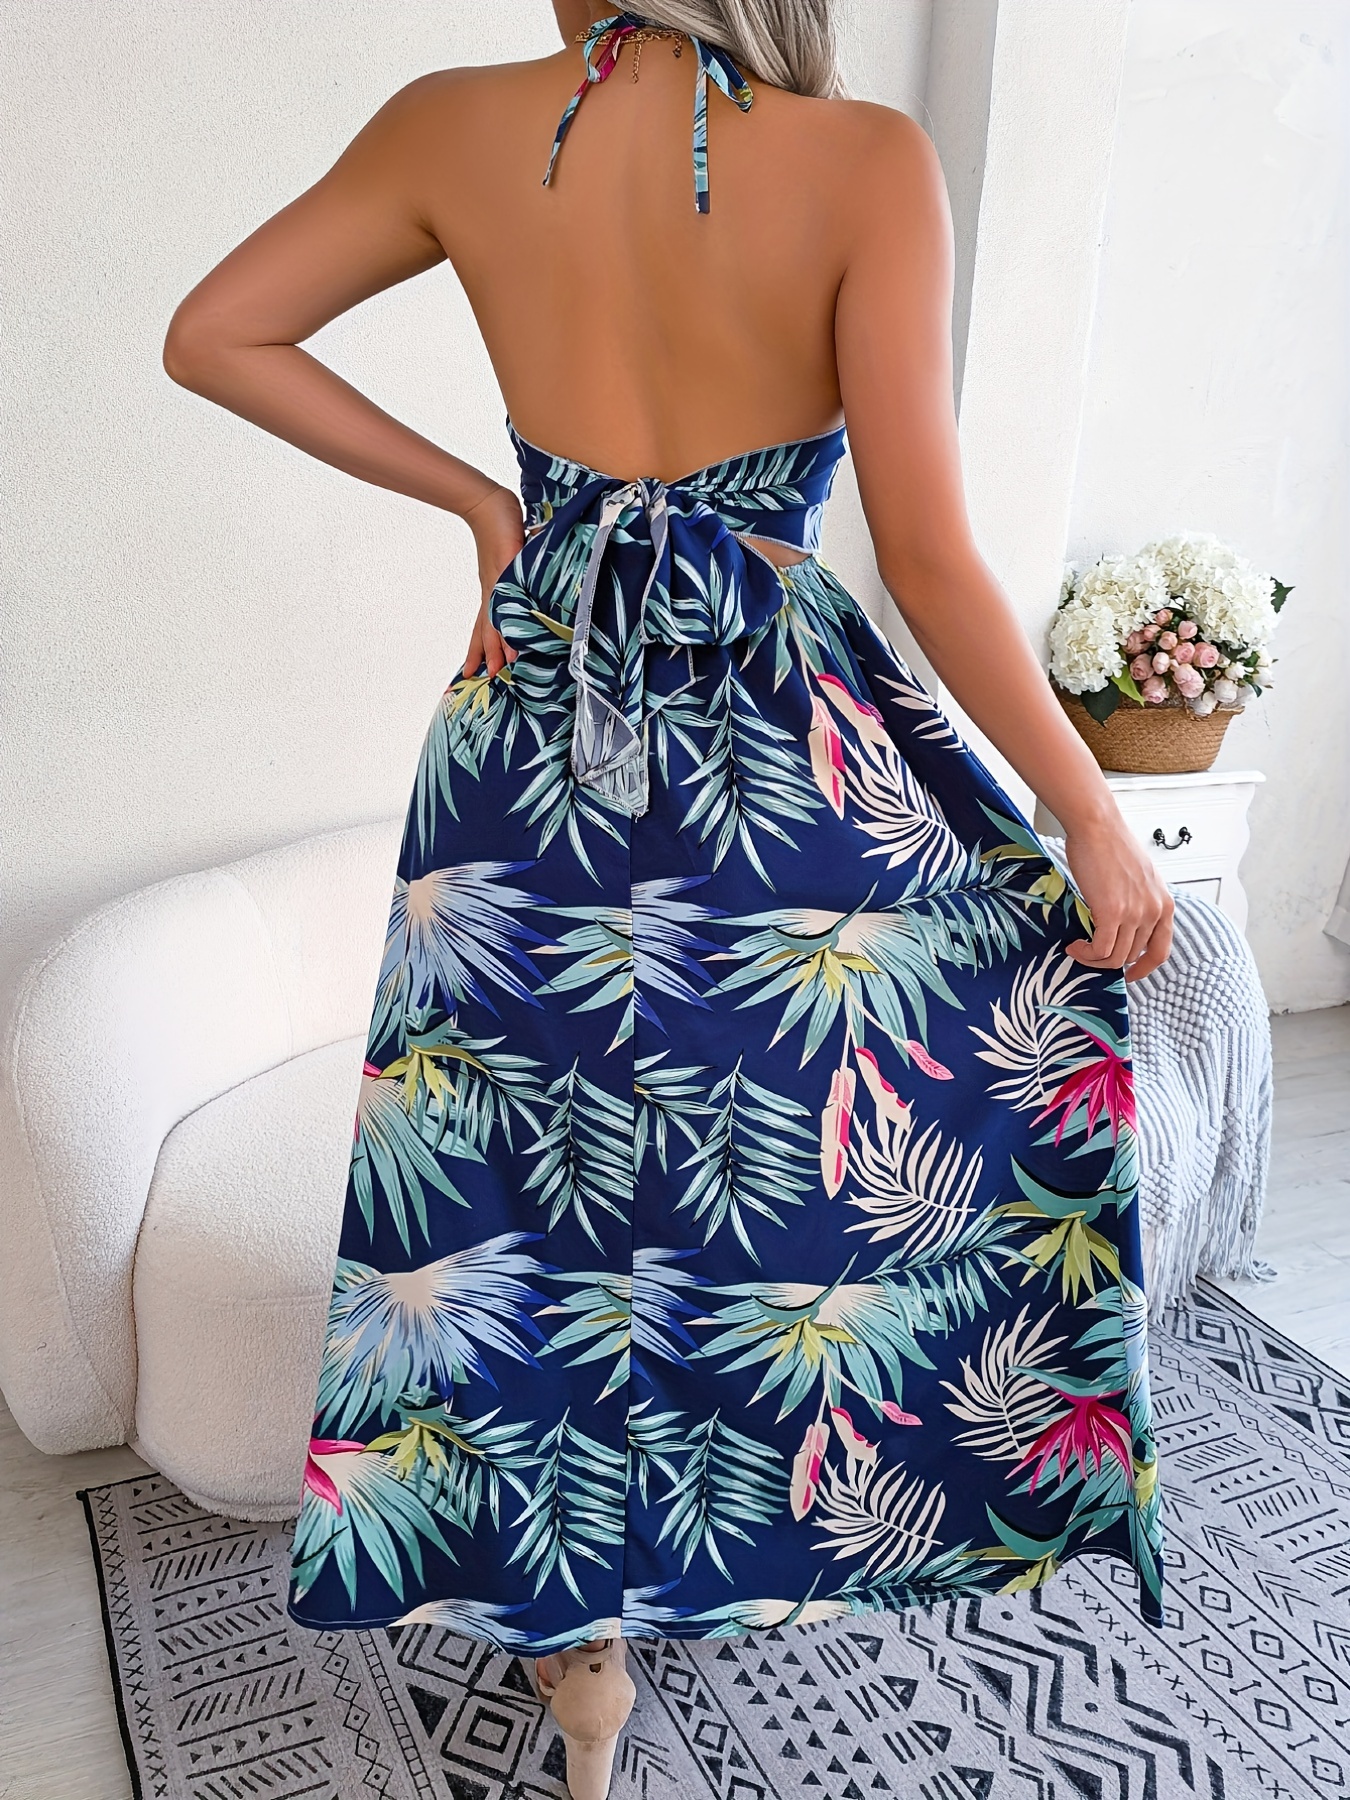  Bopchk Summer Backless Dress Women Halter Tie Bow Sleeveless  Loose Bohemian Maxi Dresses Female Party Elegant Beach,A,S : Clothing,  Shoes & Jewelry